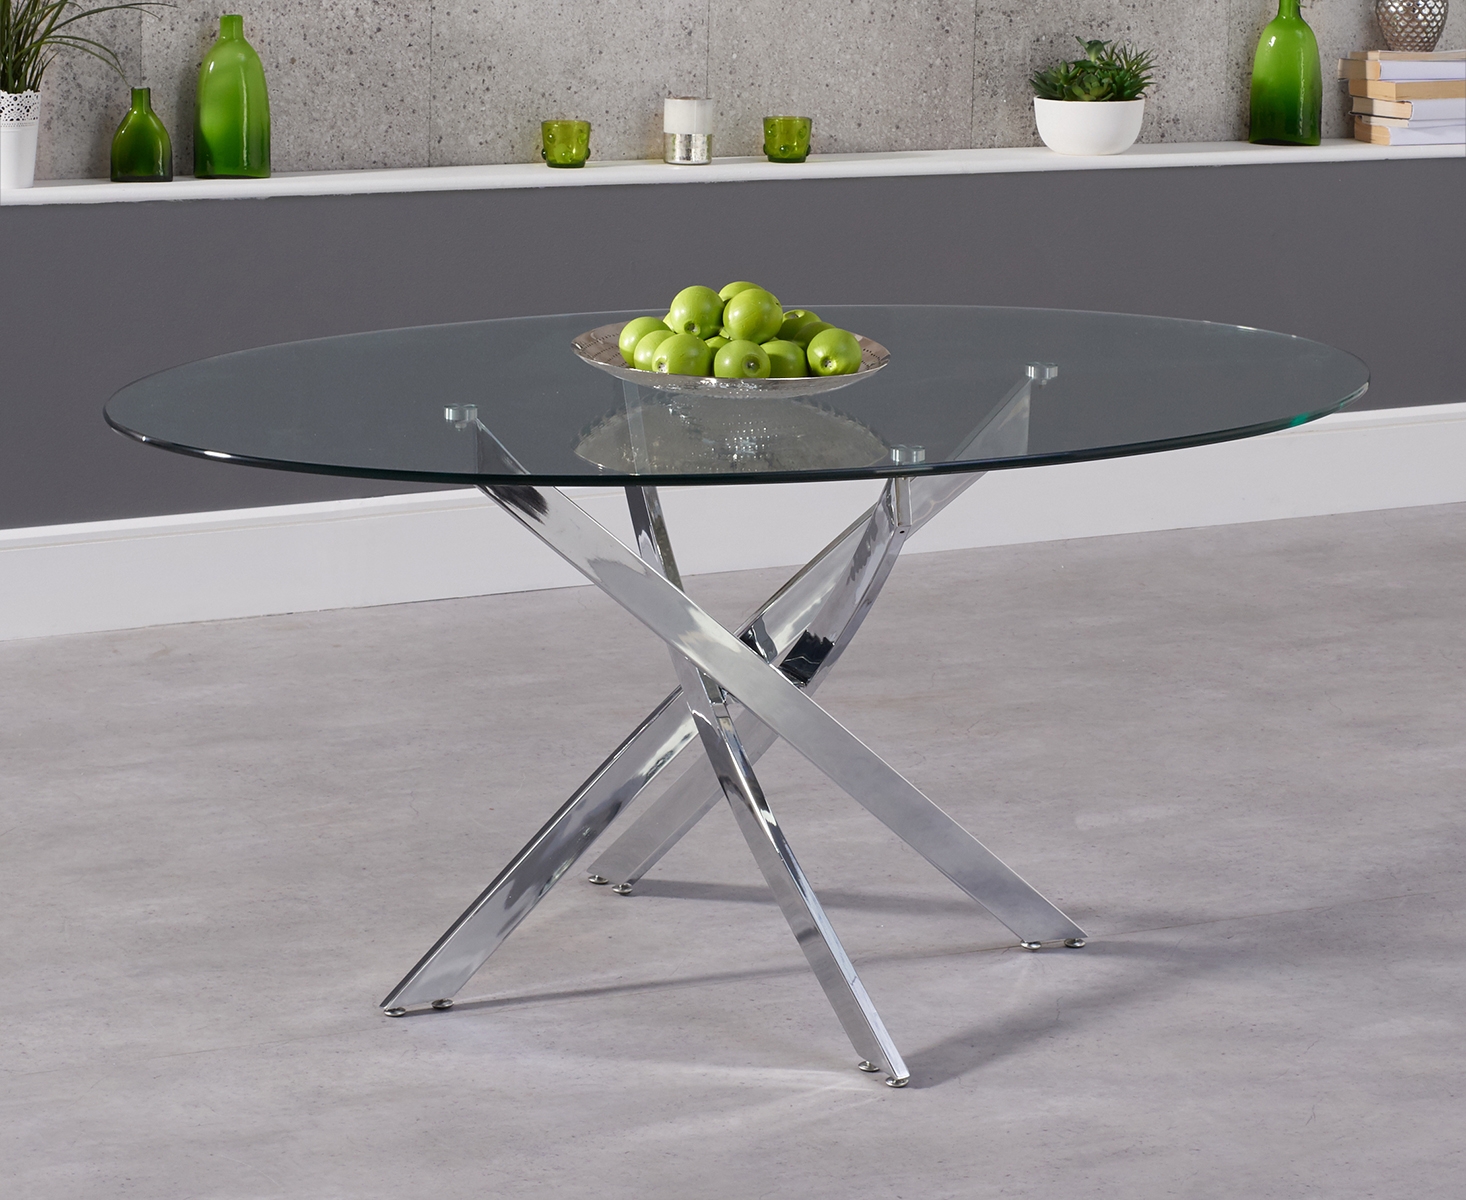 Photo 2 of Bernini 165cm oval glass dining table with 6 grey astrid chairs